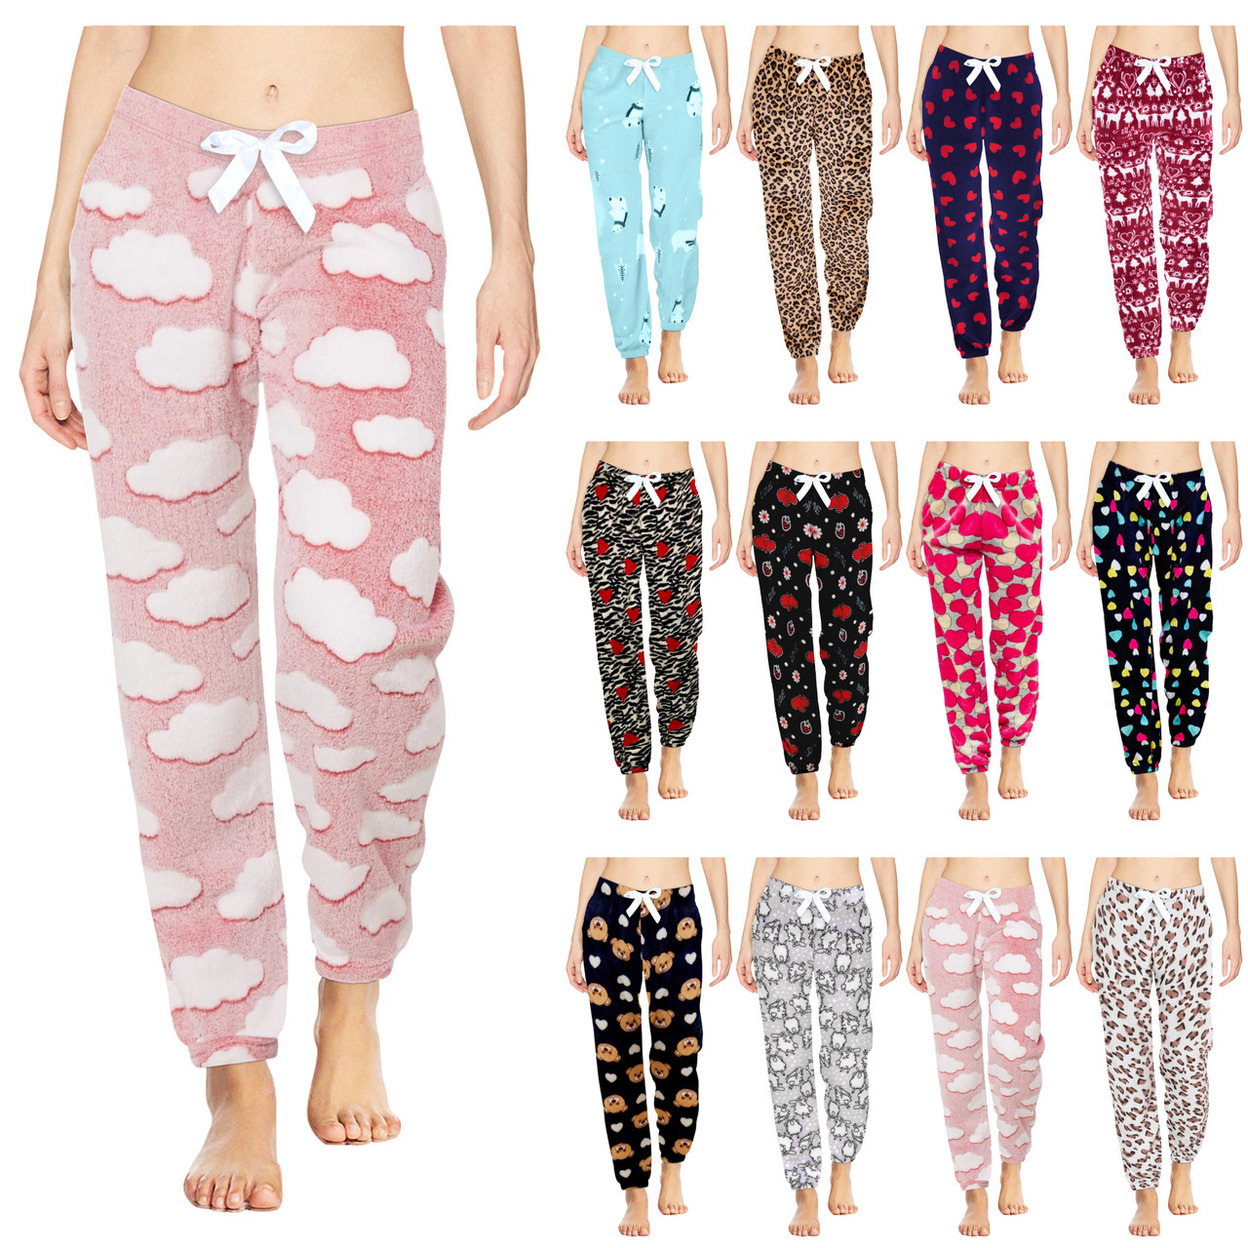 Multi-Pack: Women's Printed Ultra-Soft Comfy Stretch Micro-Fleece Pajama Lounge Pants - 1-pack, Love, X-large